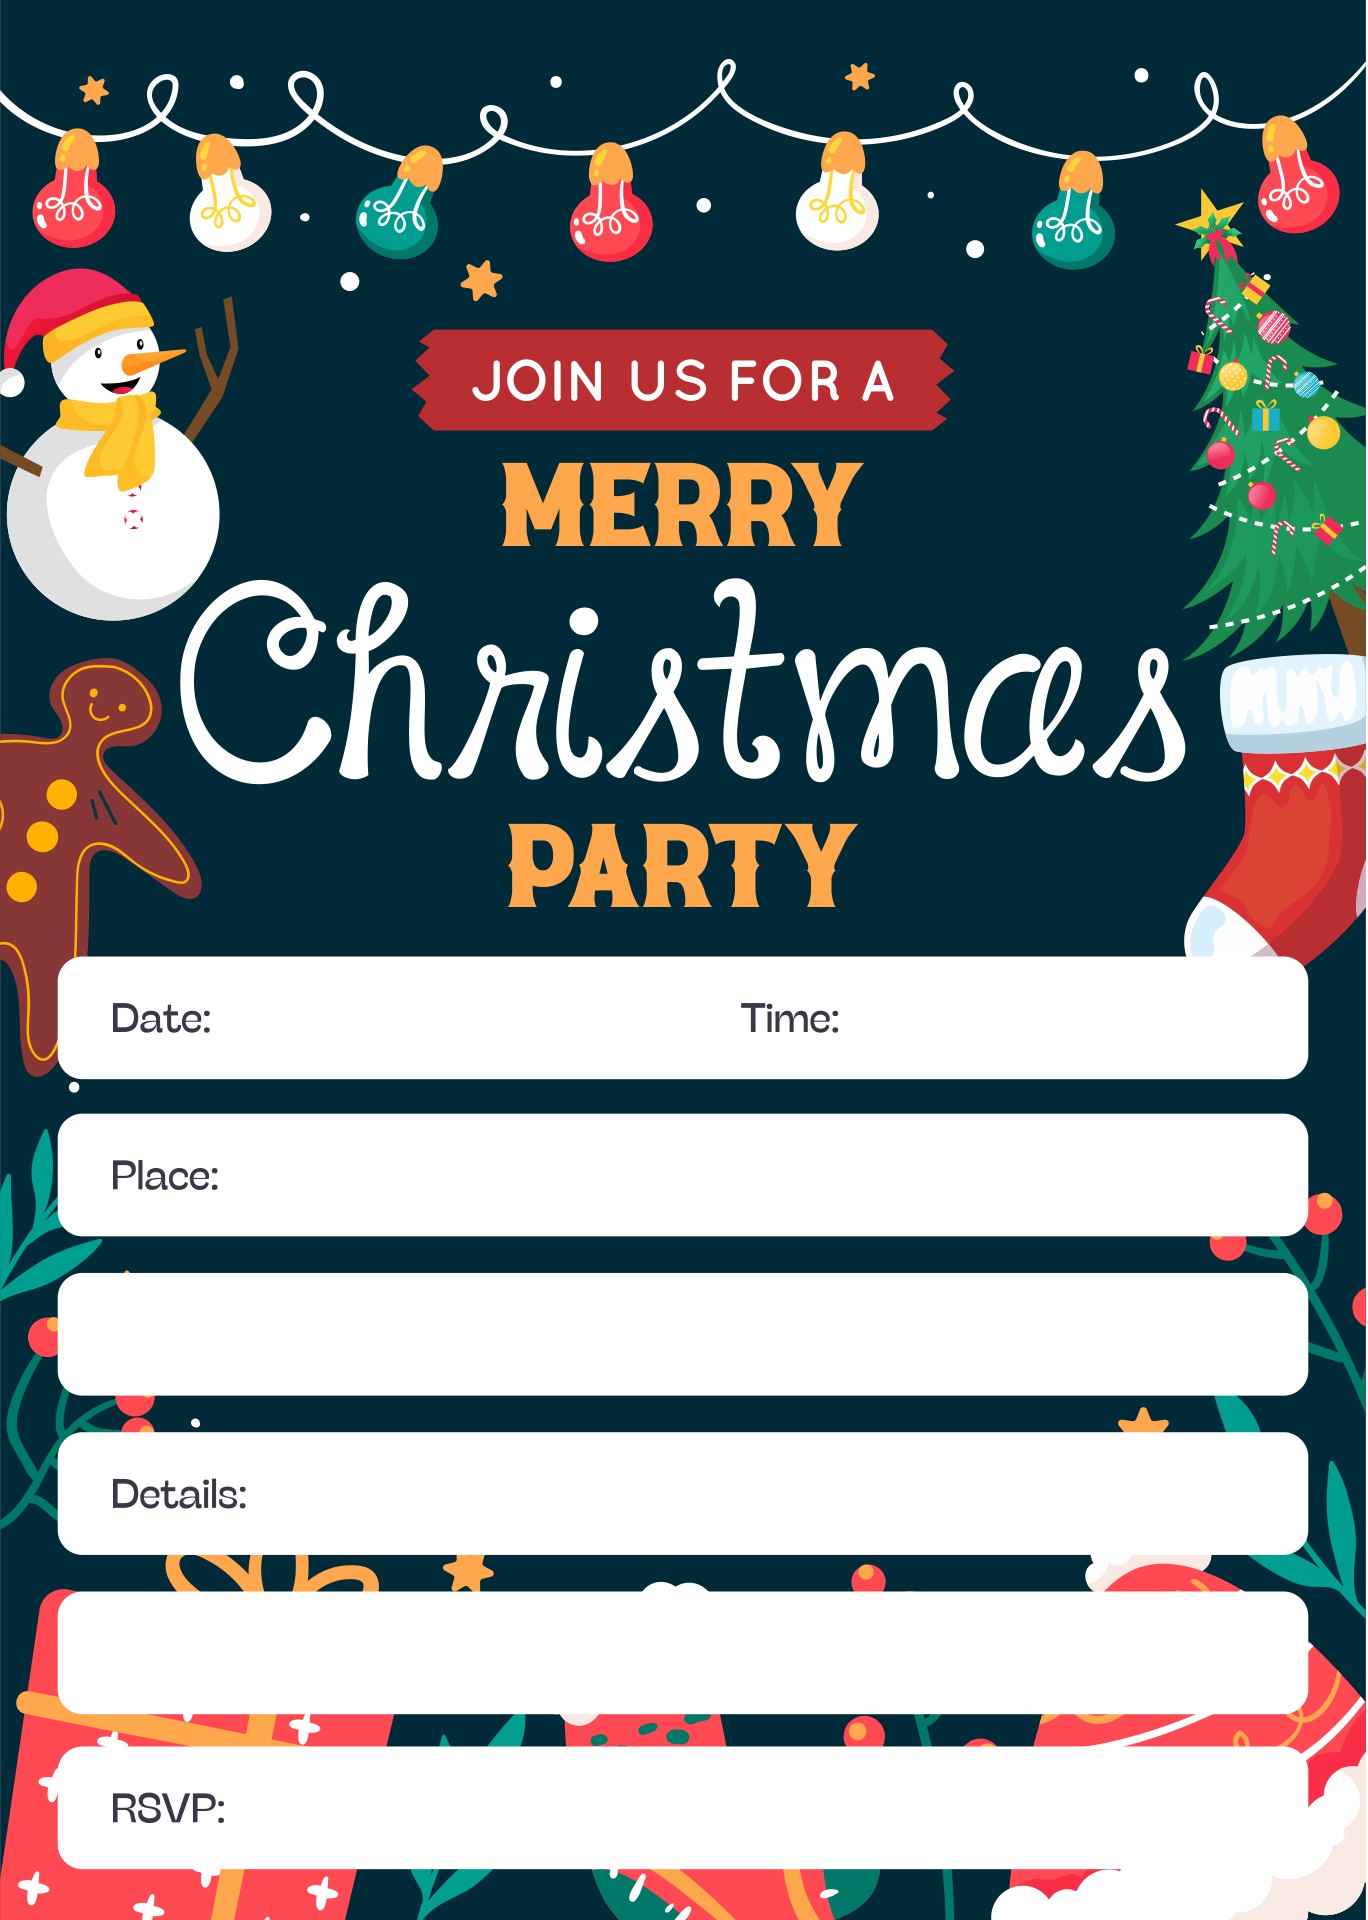 7 Best Images of Free Printable Christmas Invitation Templates - Free ...